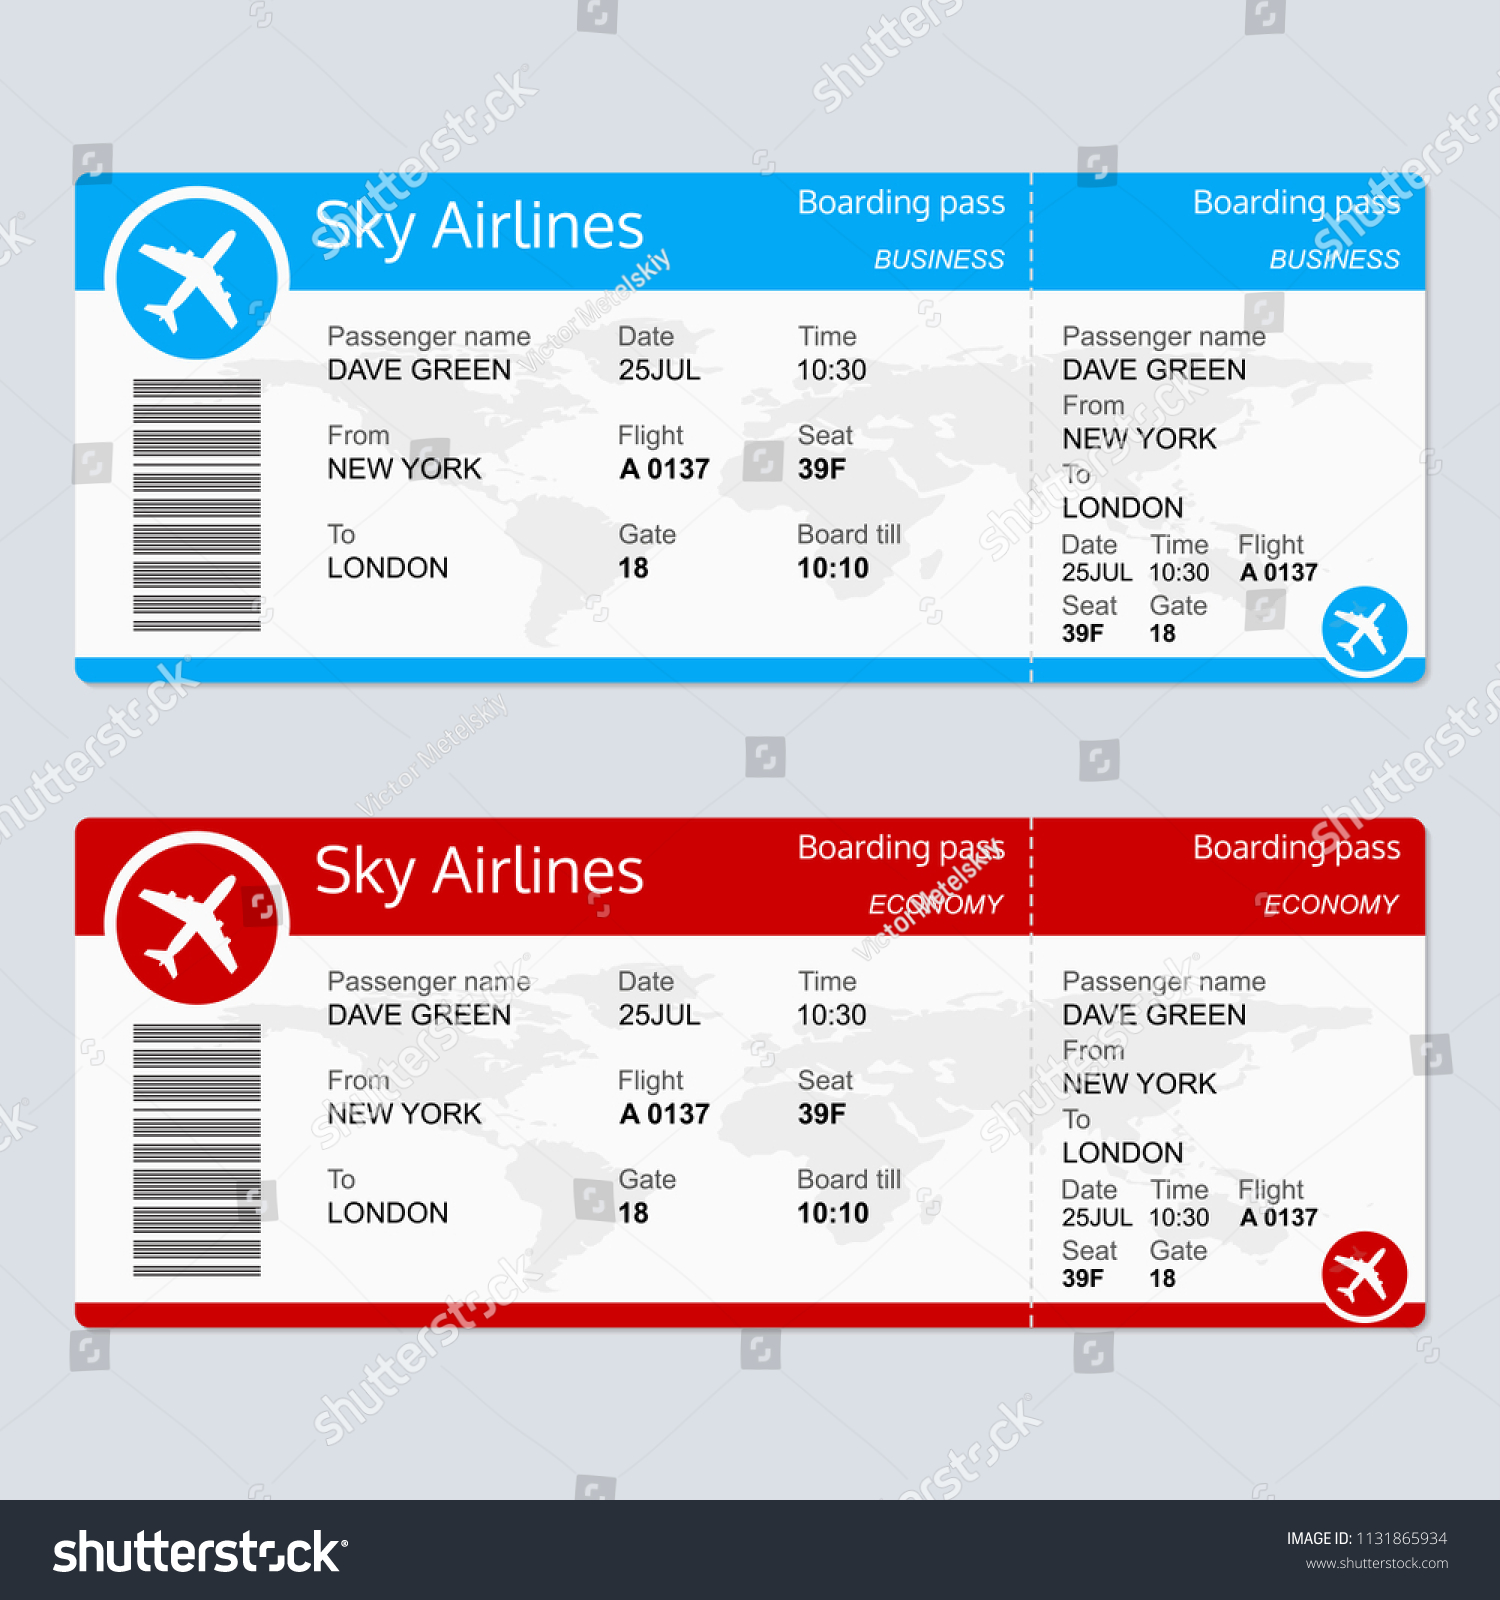 Vintage Airline Ticket Template from image.shutterstock.com